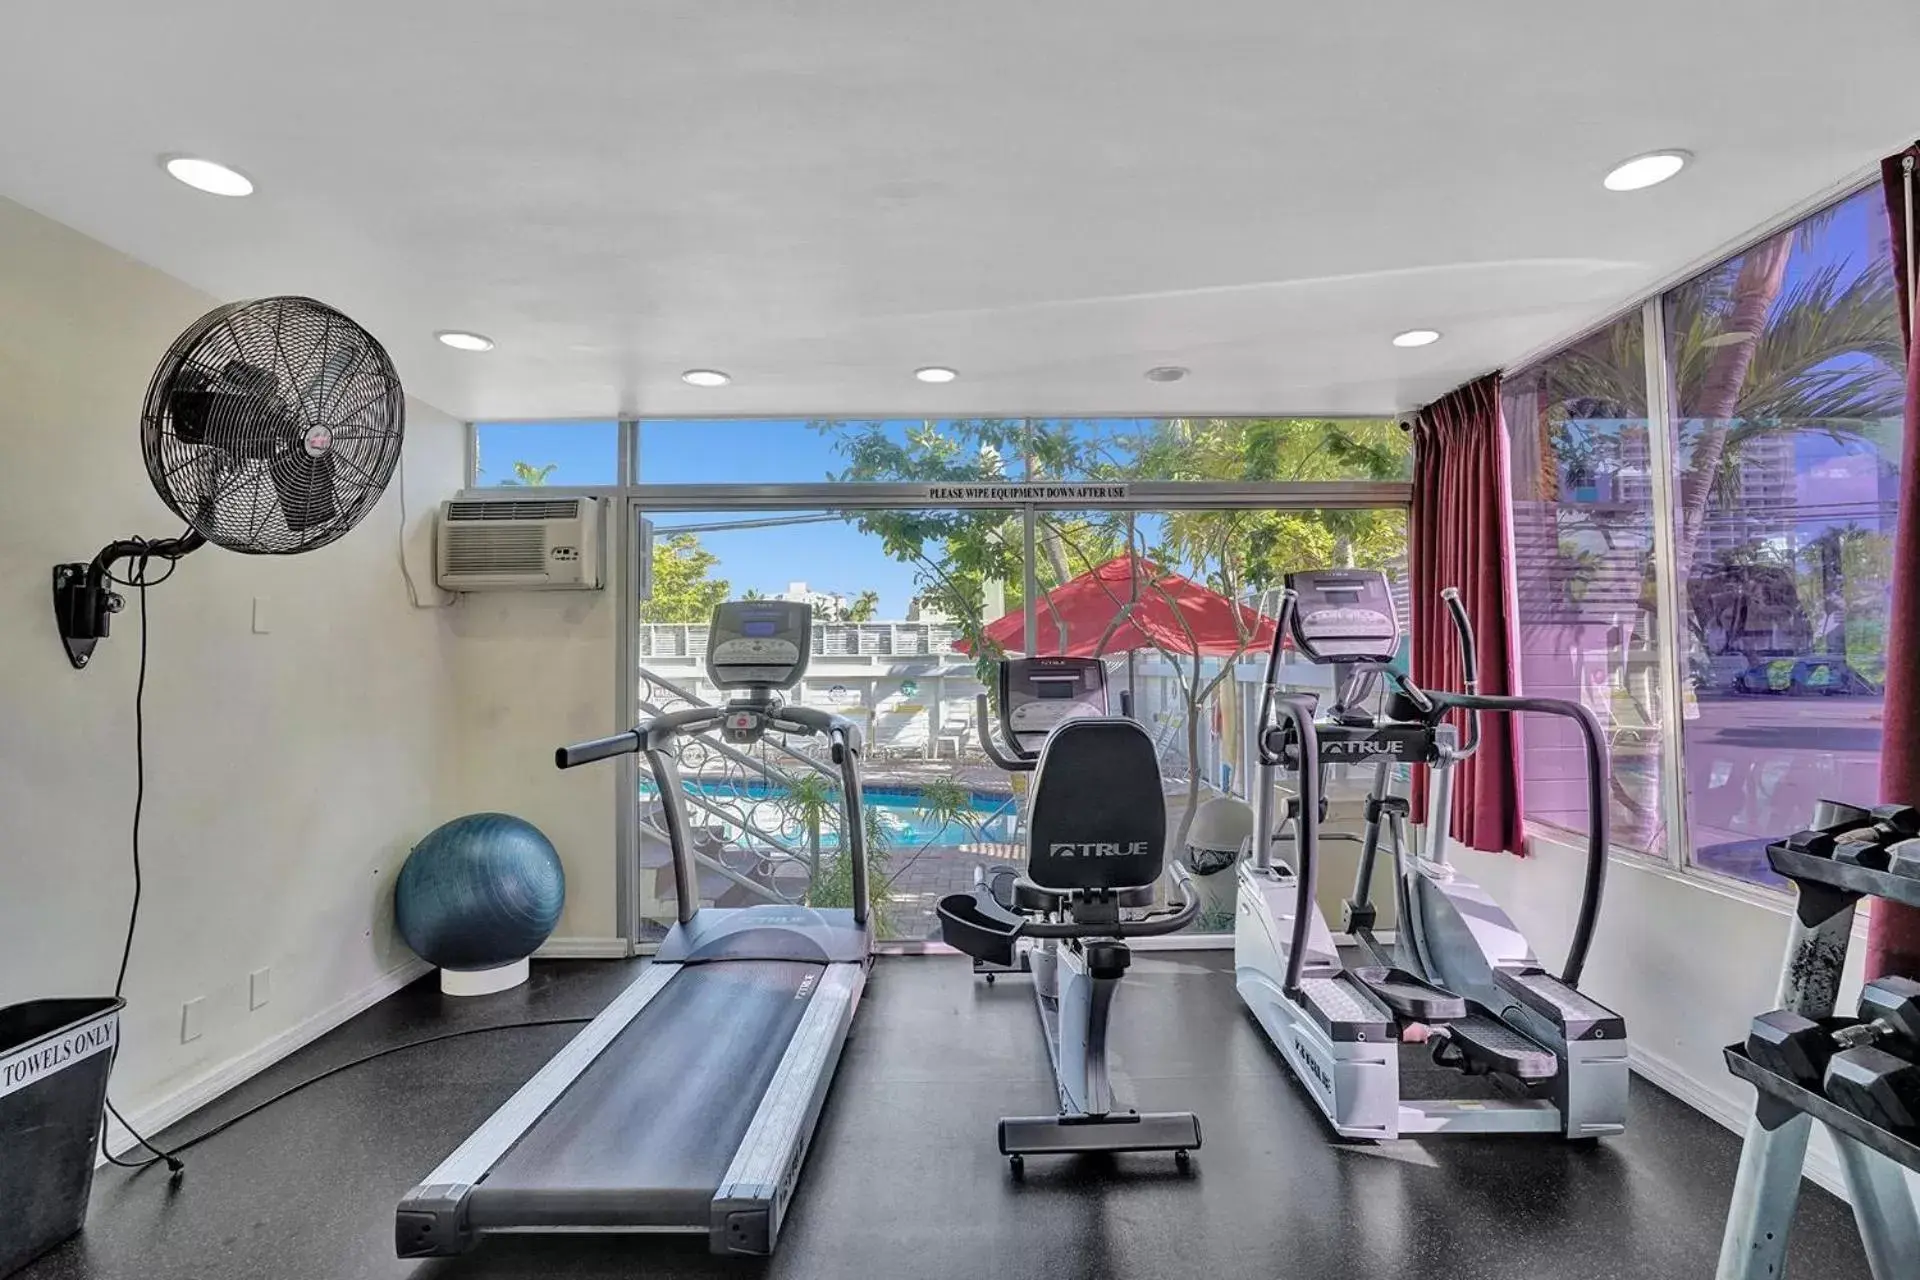 Fitness centre/facilities, Fitness Center/Facilities in The Worthington Resorts - Clothing Optional - Men Only - Solo hombres